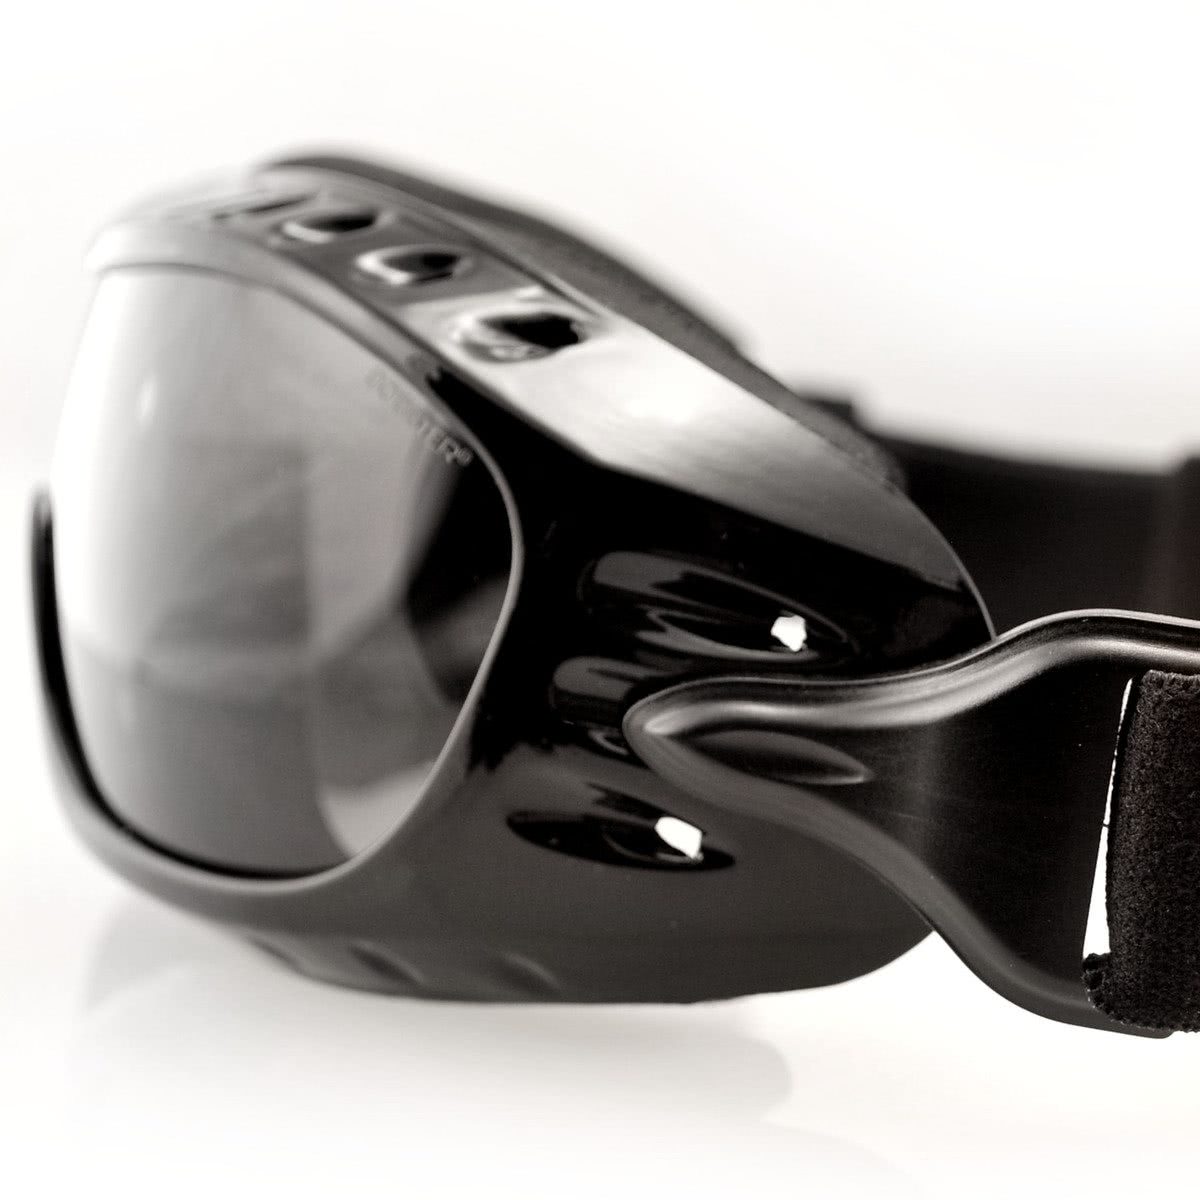 Bobster Night Hawk Goggles - Newest Products